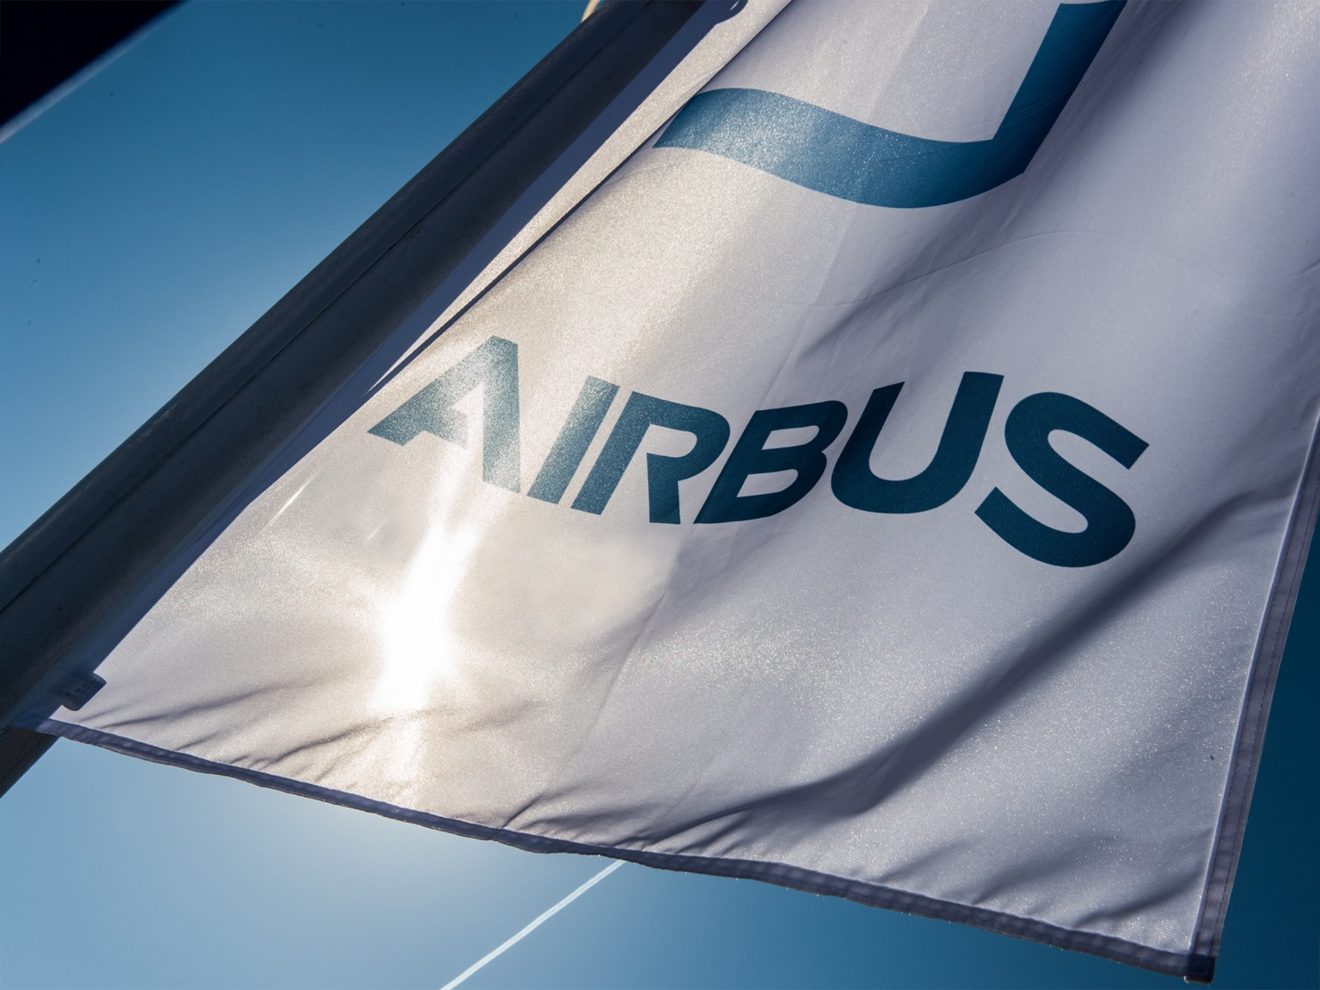 Airbus reports good first quarter 2023 results reflected by 127 commercial aircraft deliveries